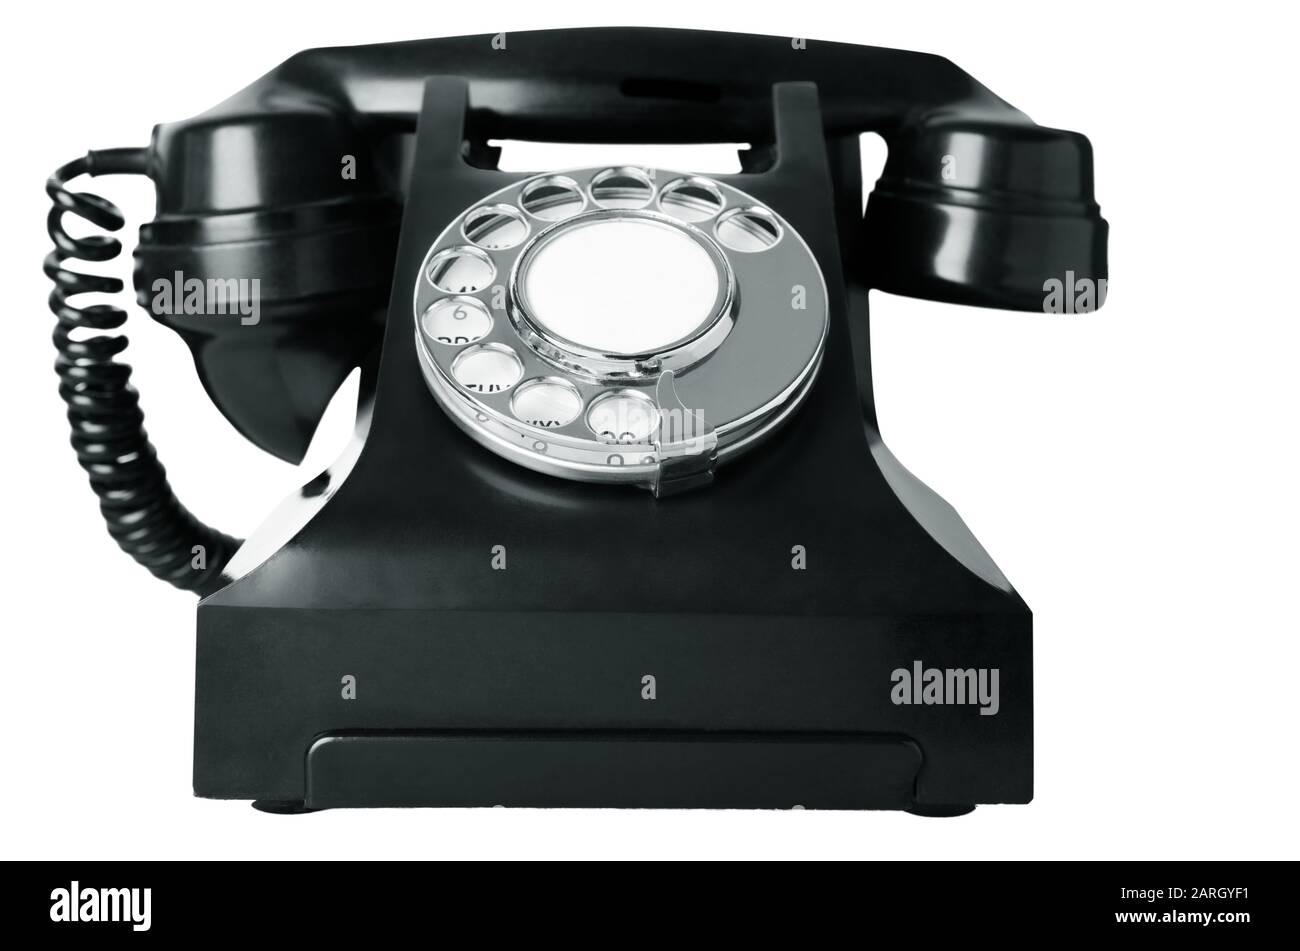 An old British bakelite telephone circa 1940s, isolated on a white background. Black and white image (greyscale). Stock Photo